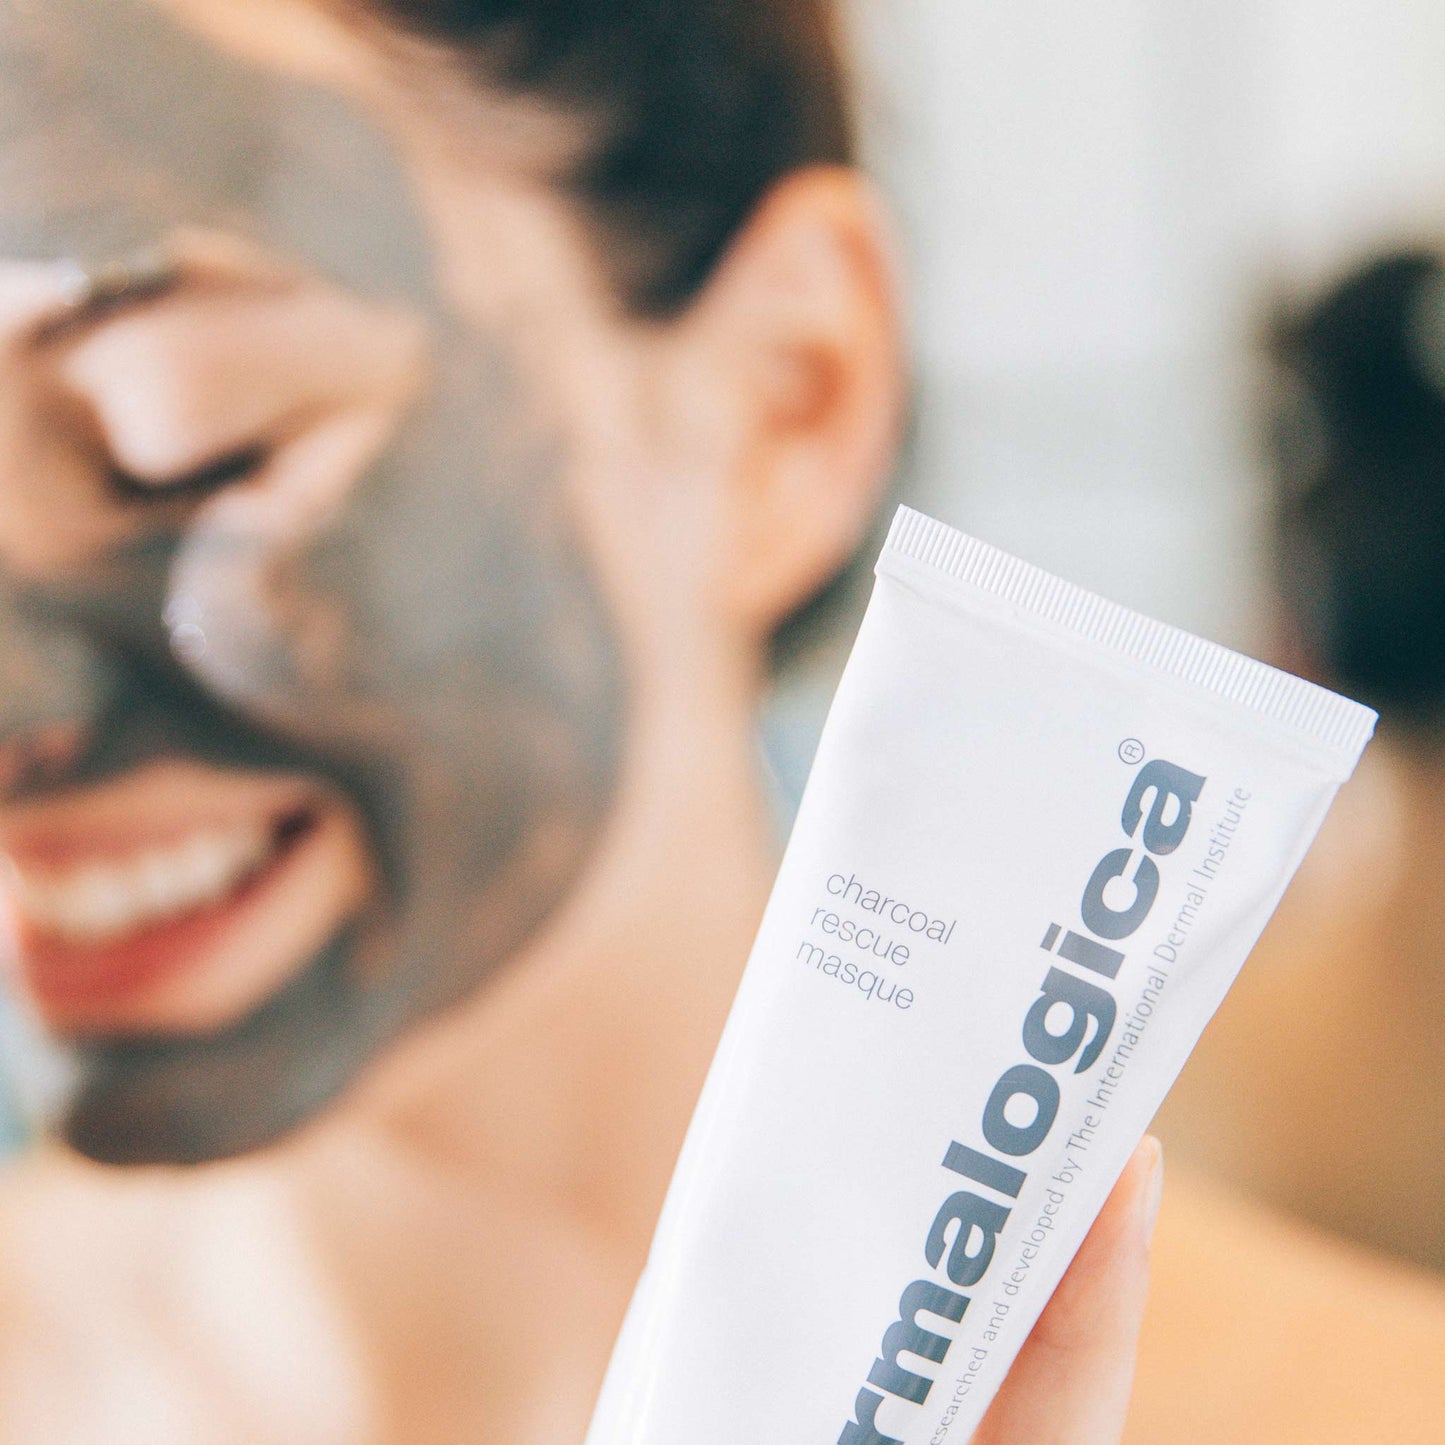 woman using charcoal rescue masque